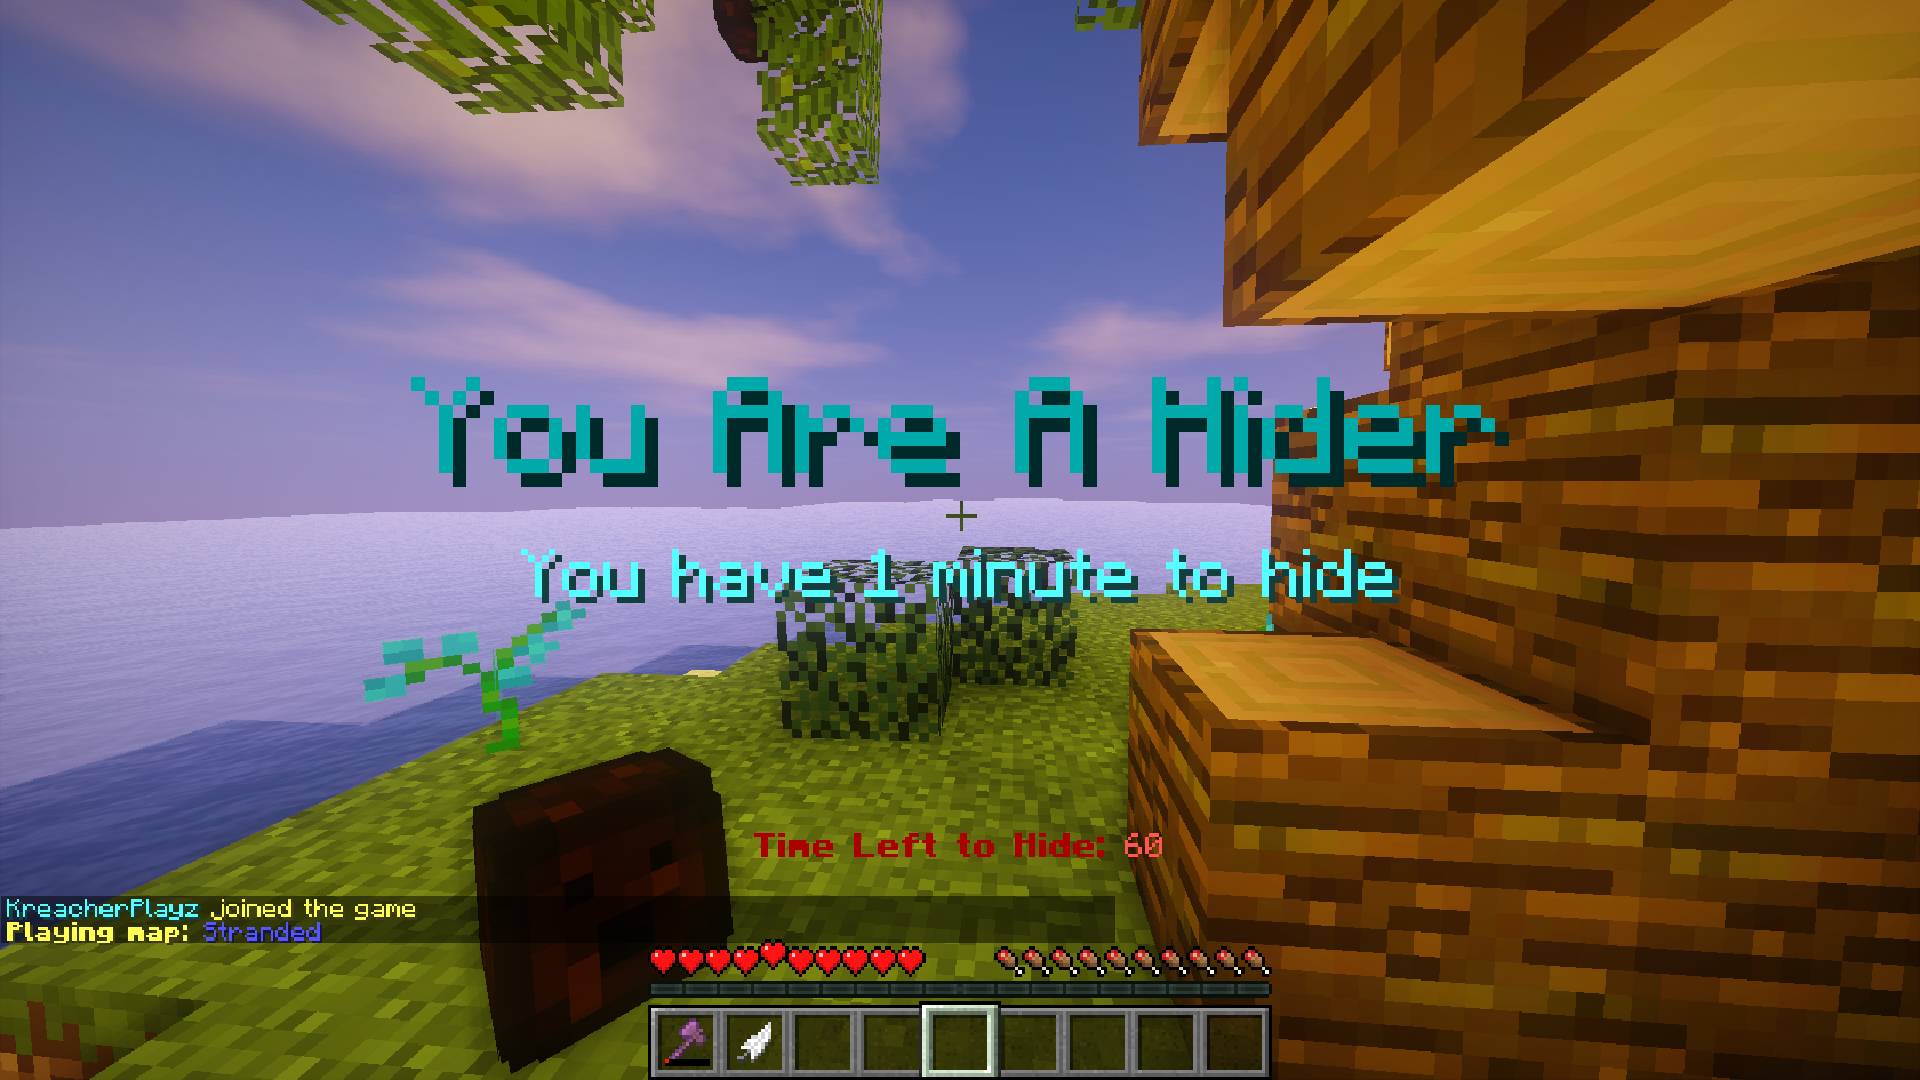 5 Reasons That Minecraft is the Best Game Ever, by Ashaz